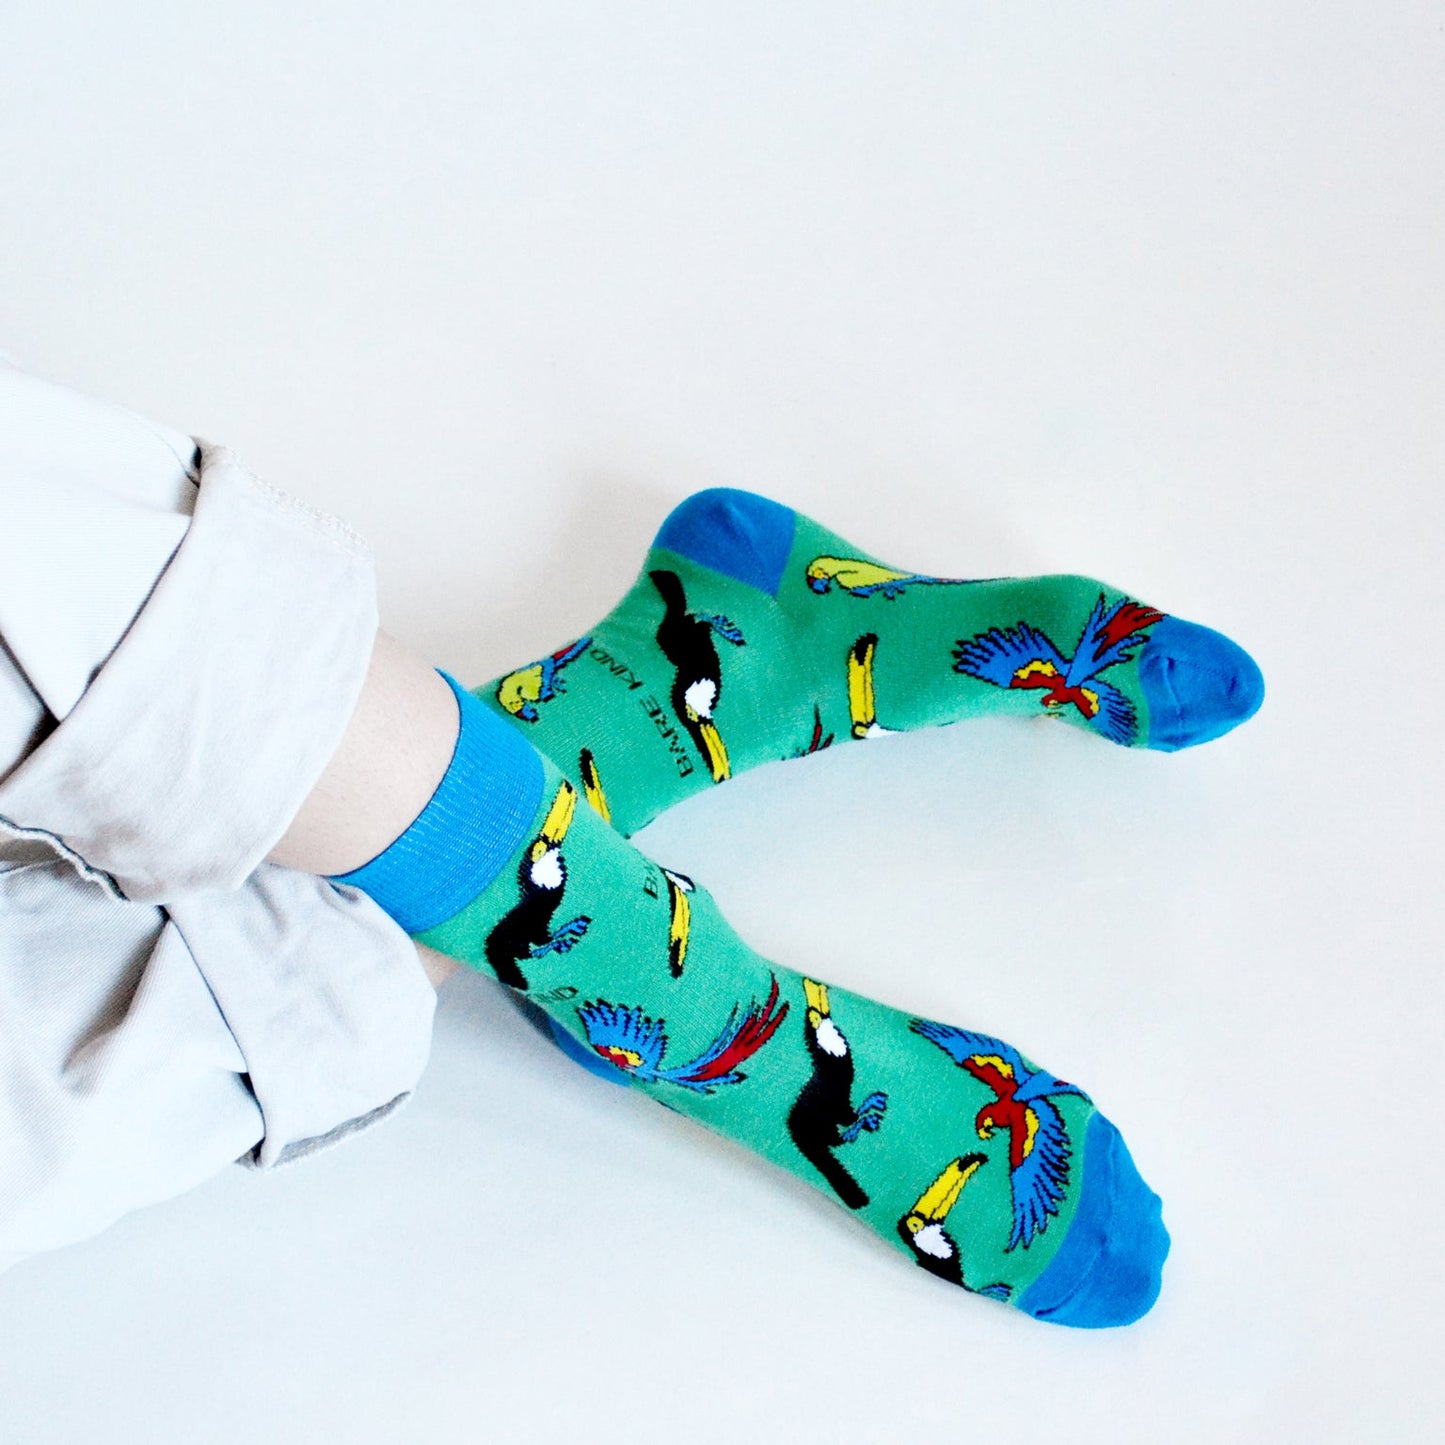 Bare Kind Bamboo Socks - Save the Toucans